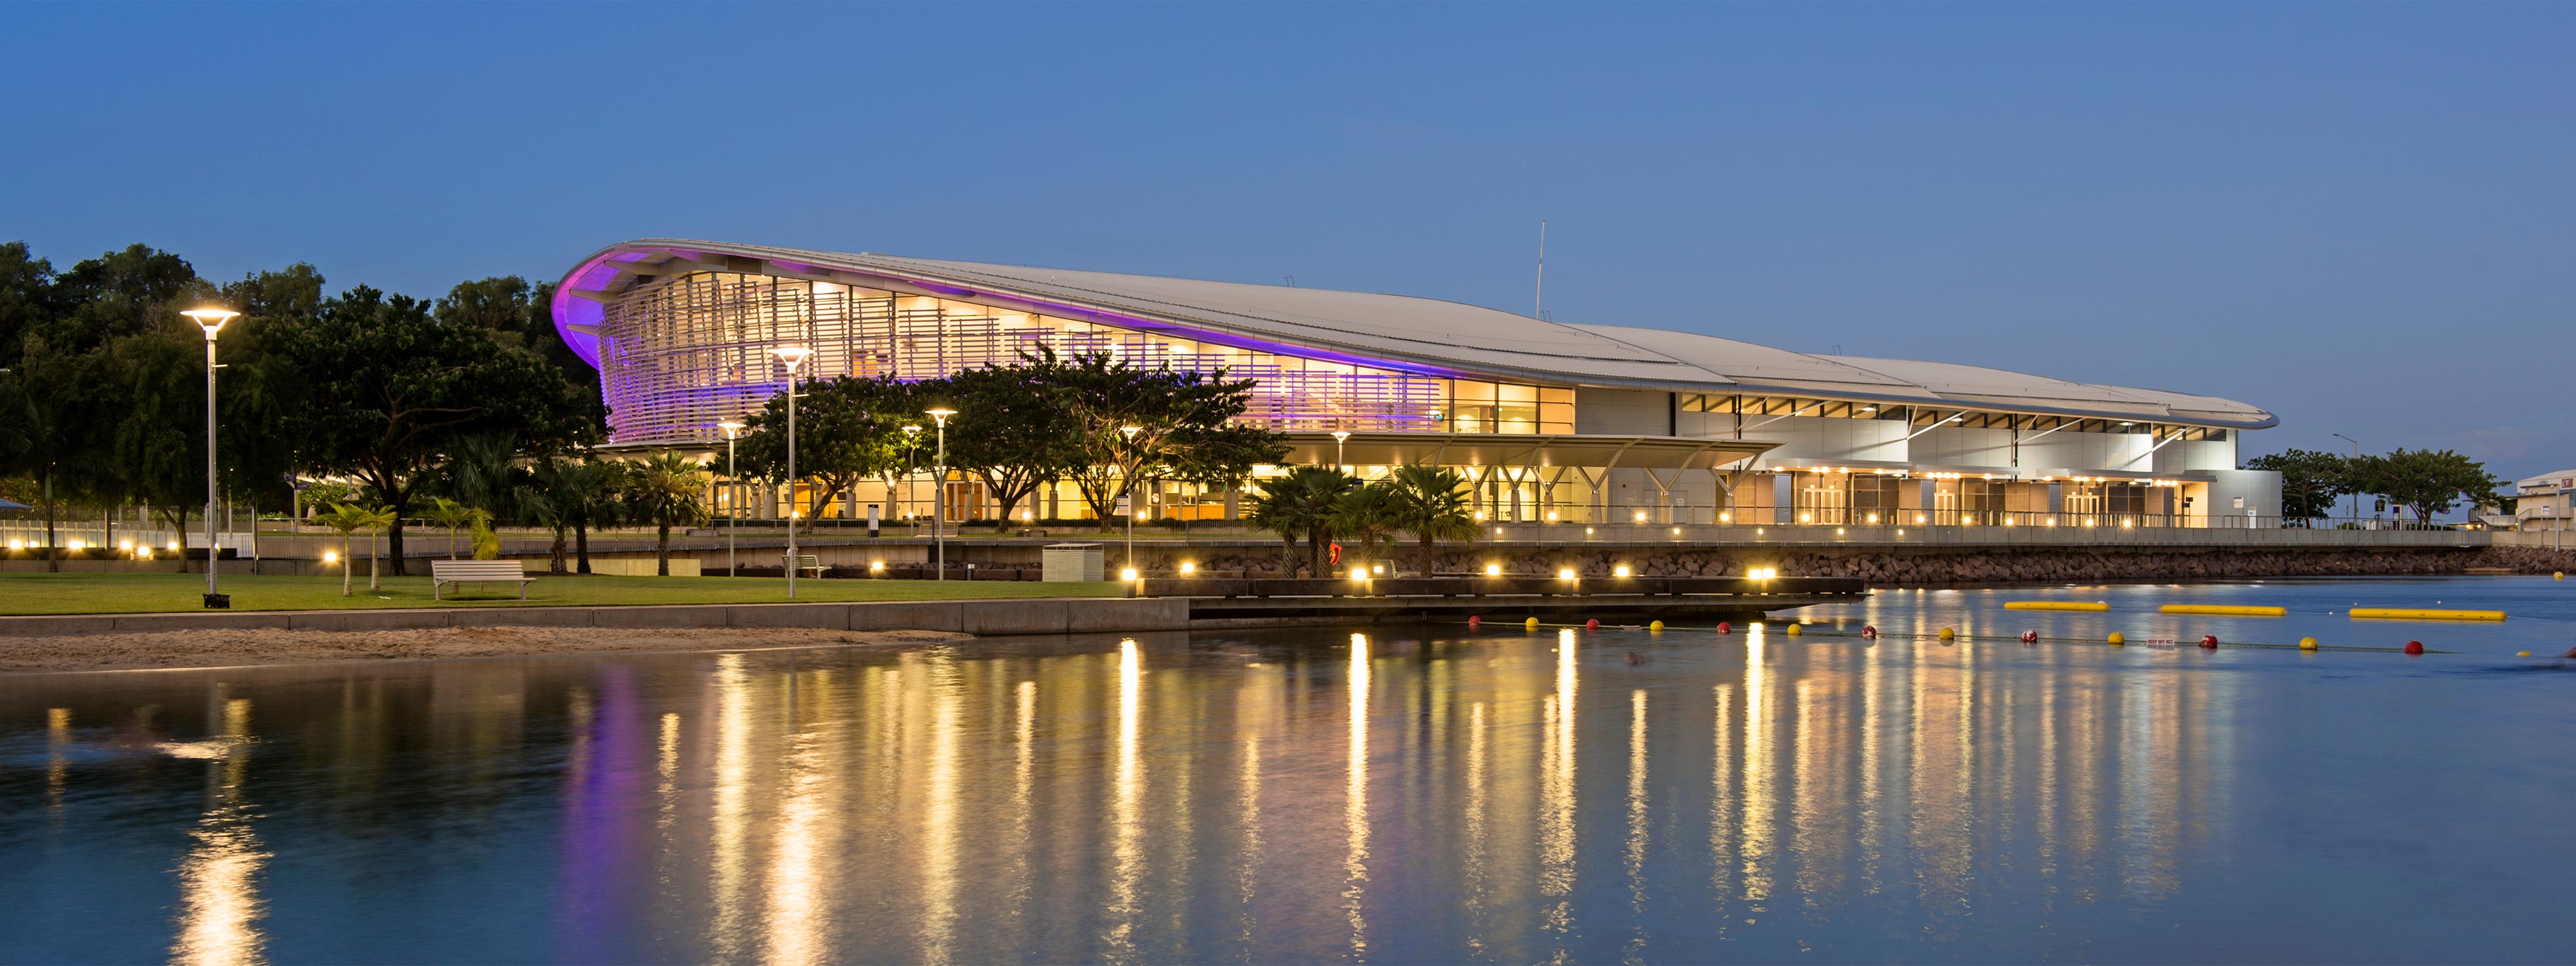 Darwin Convention Centre Achieves AIPC Quality Standards Certification